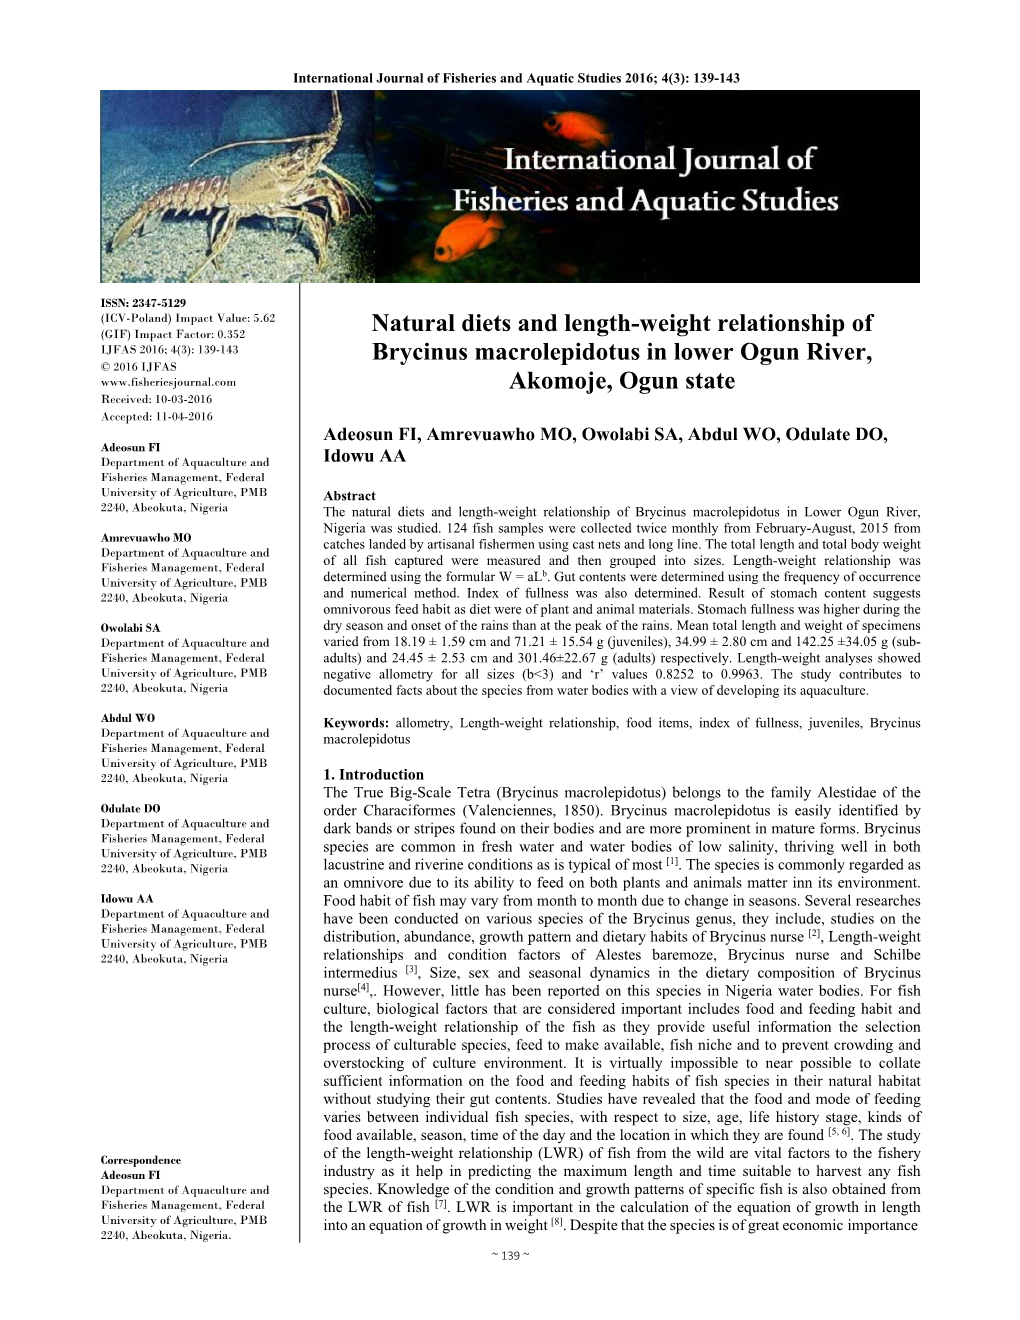 Natural Diets and Length-Weight Relationship of Brycinus Macrolepidotus in Lower Ogun River, Nigeria Was Studied